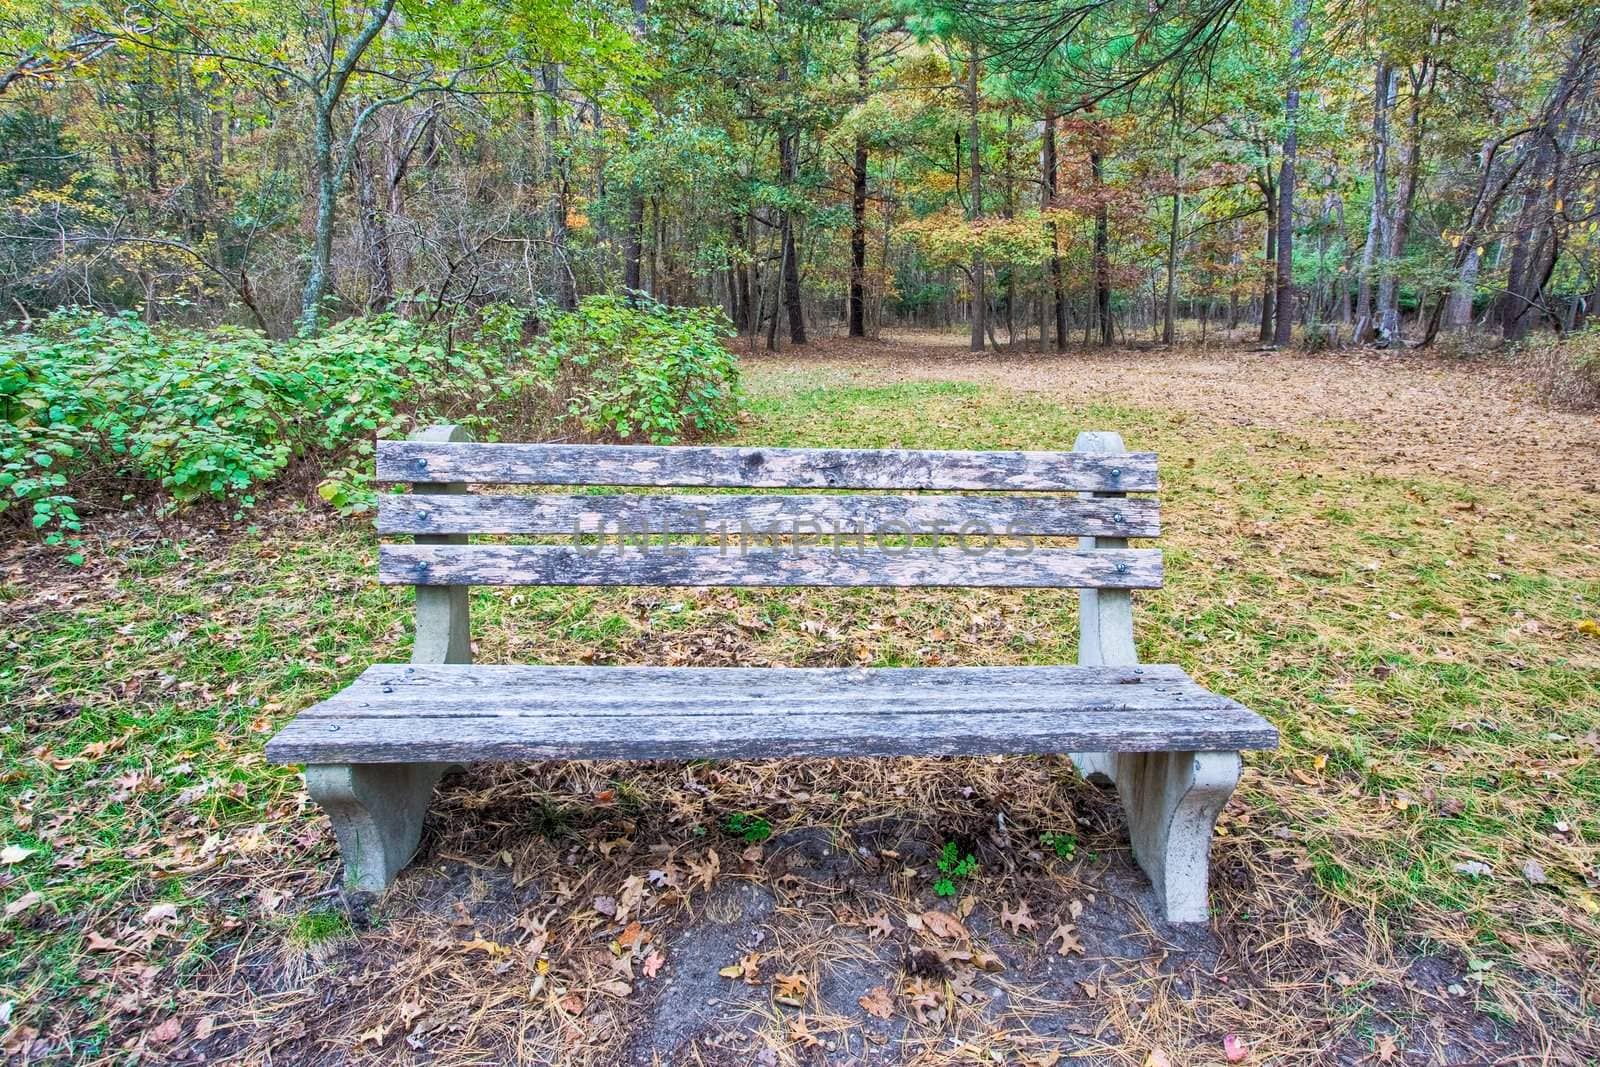 A Bench in the Woods by sbonk